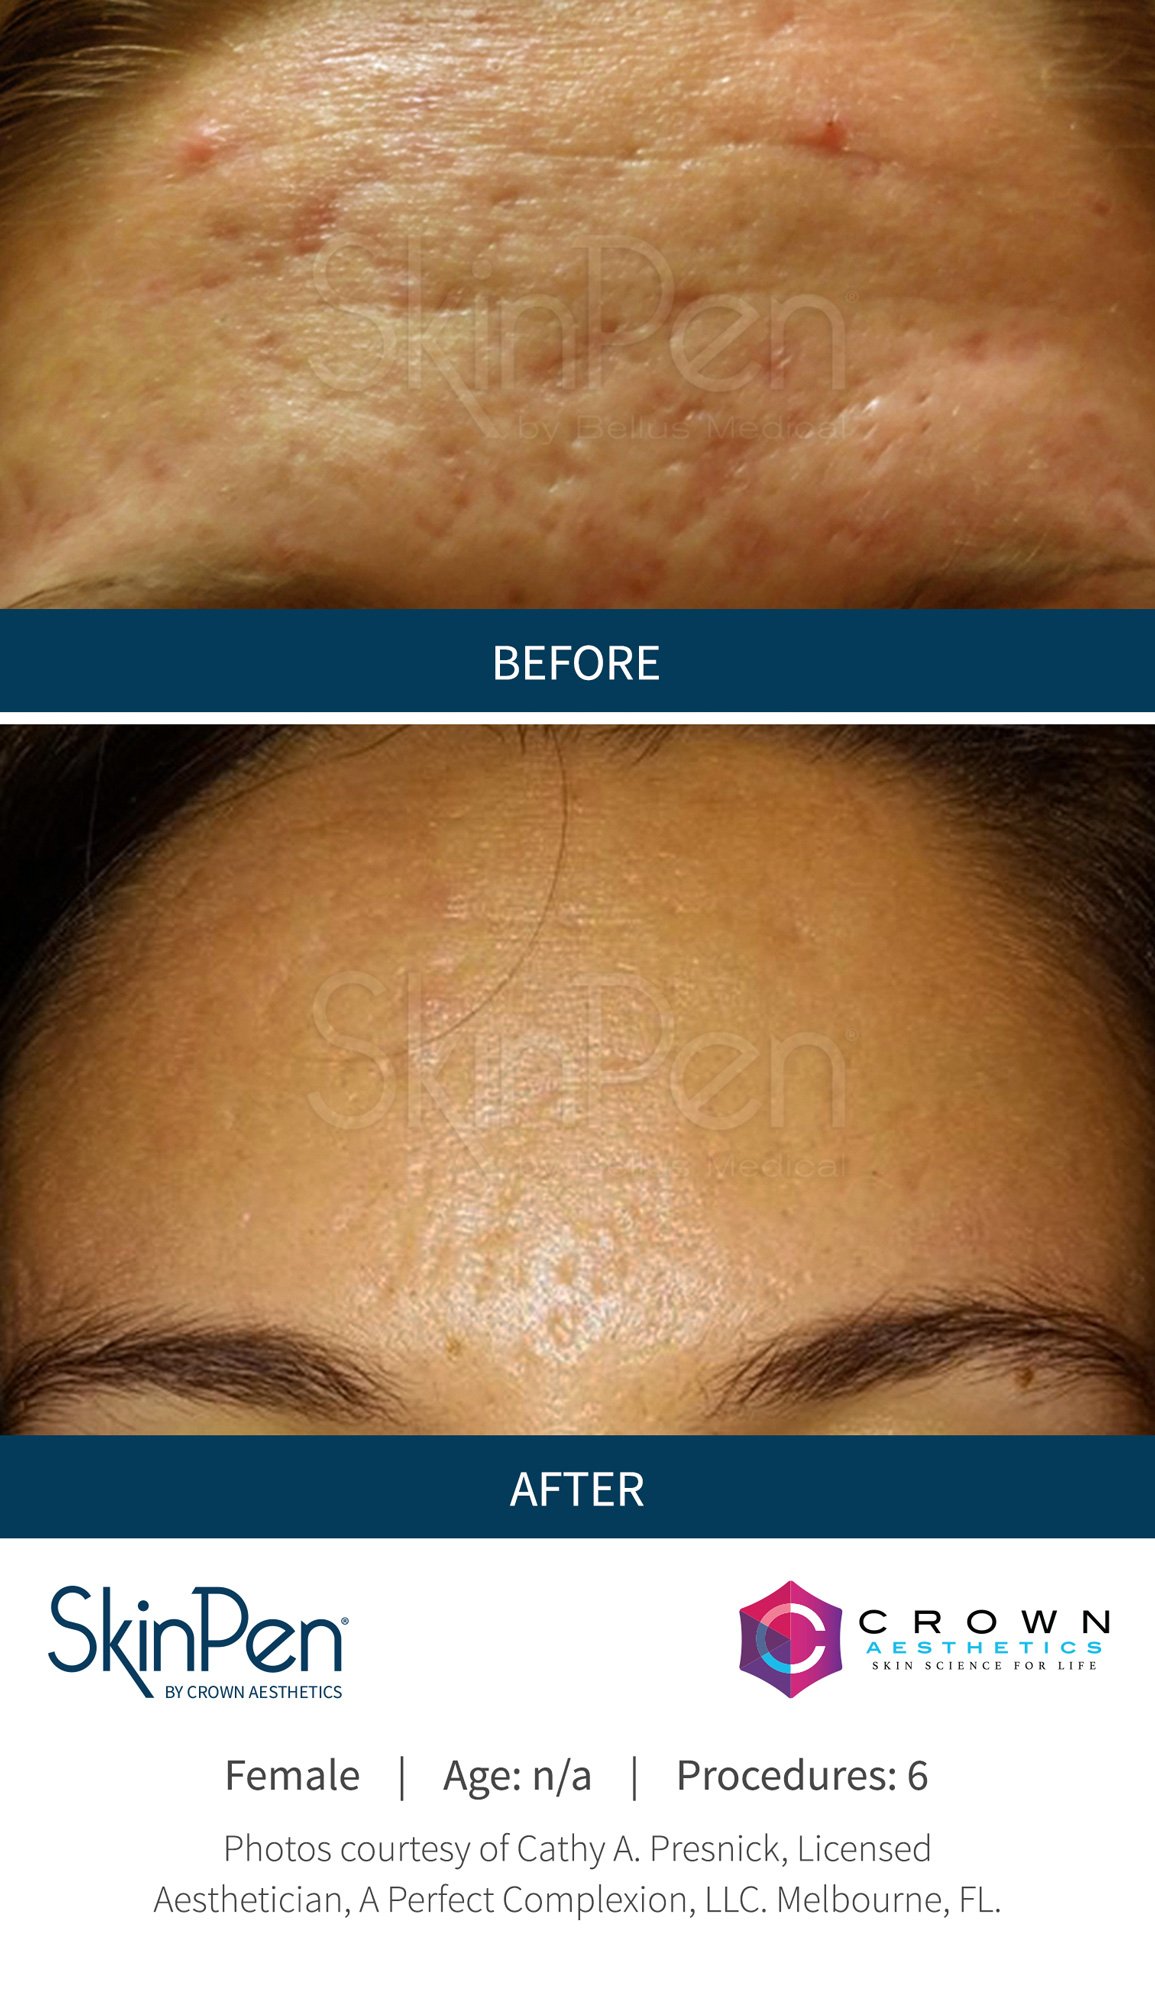 Hydrafacial treatment before and after - 4